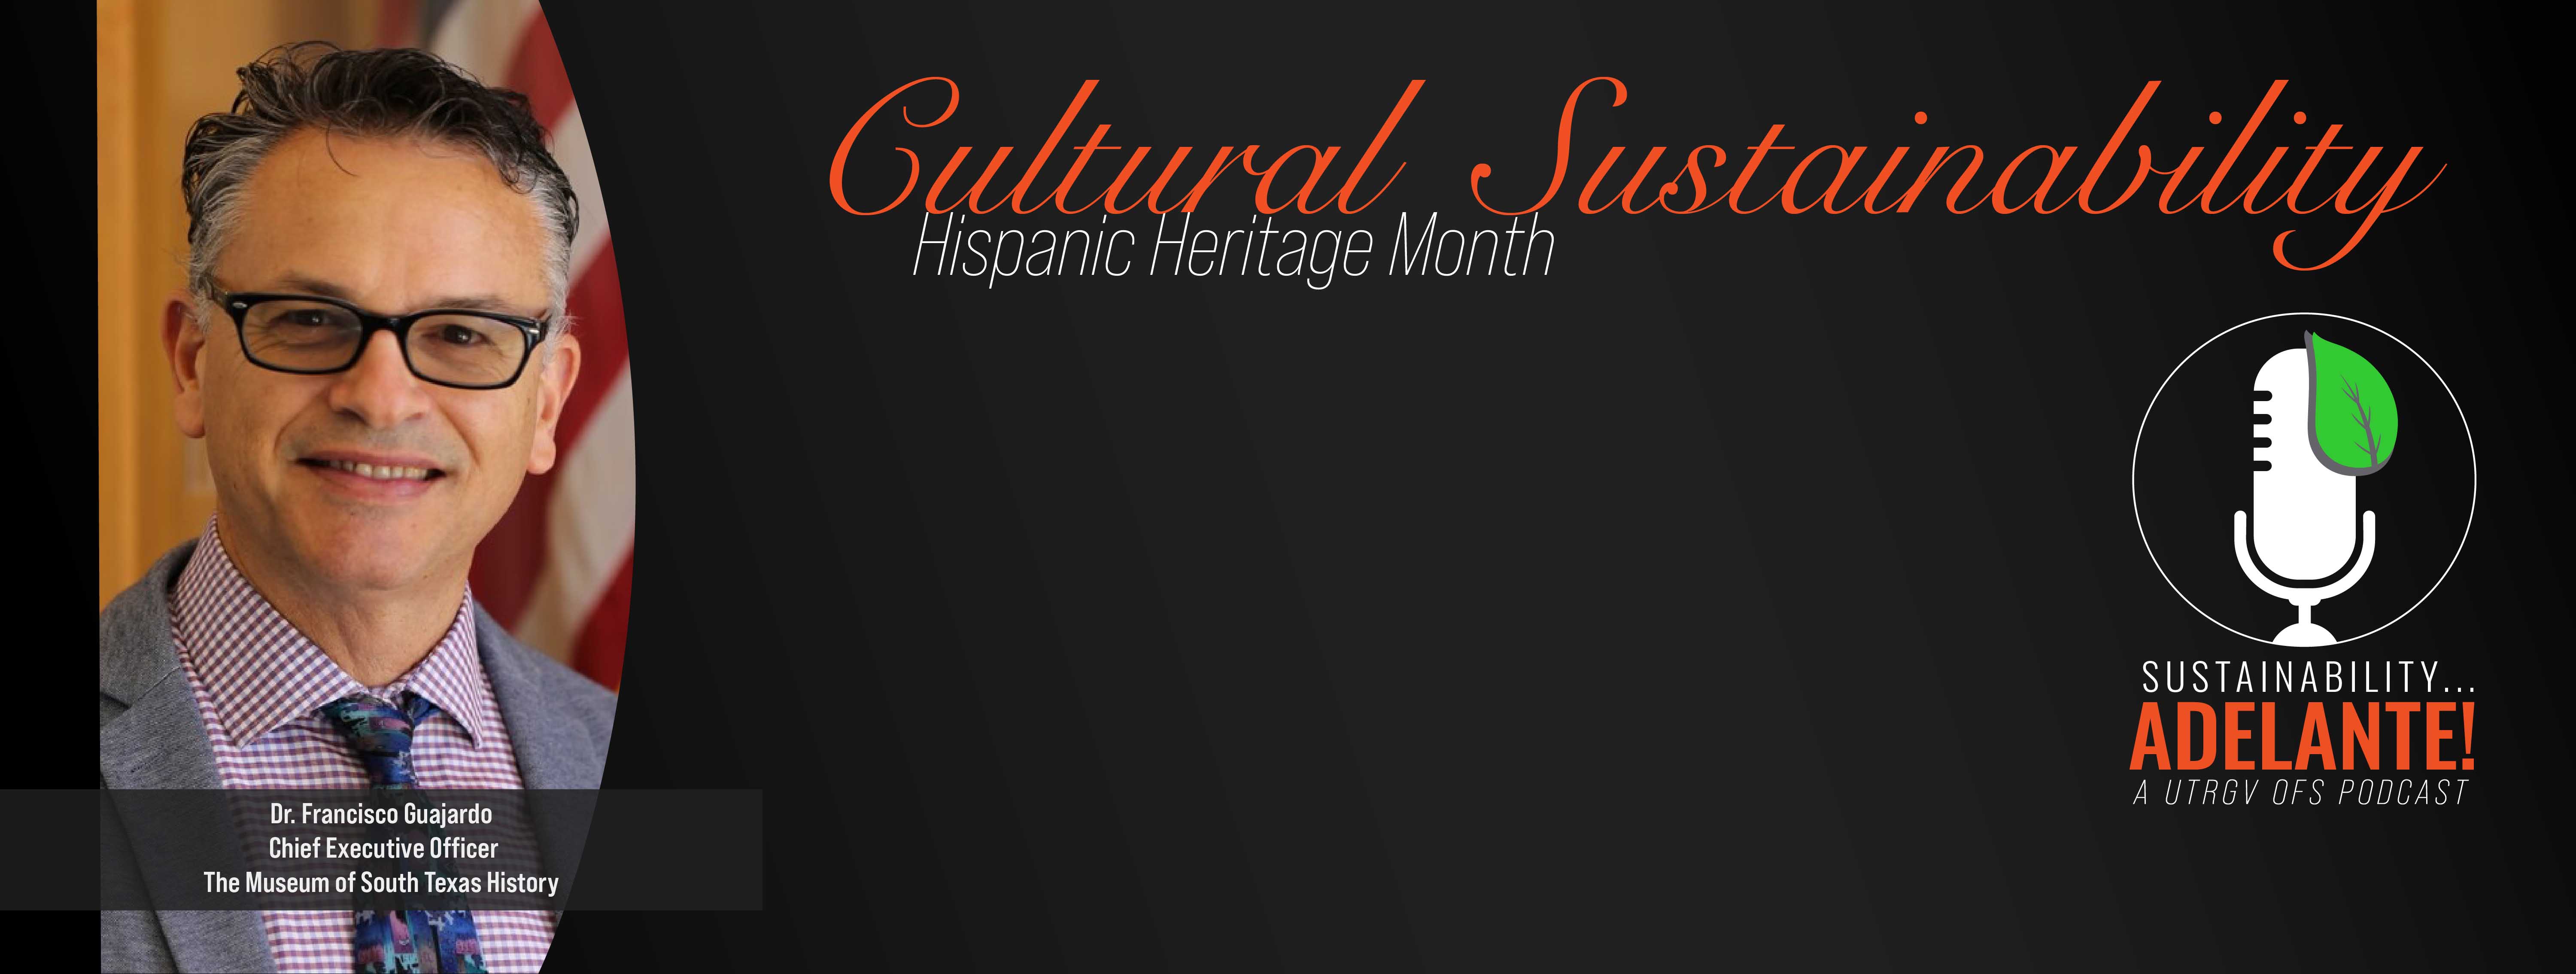 Cultural Sustainability Hispanic Heritage Month. Dr. Guajardo Chief Executive Officer at The Museum of South Texas History. Sustainability Adelante! A UTRGV OFS Podcast